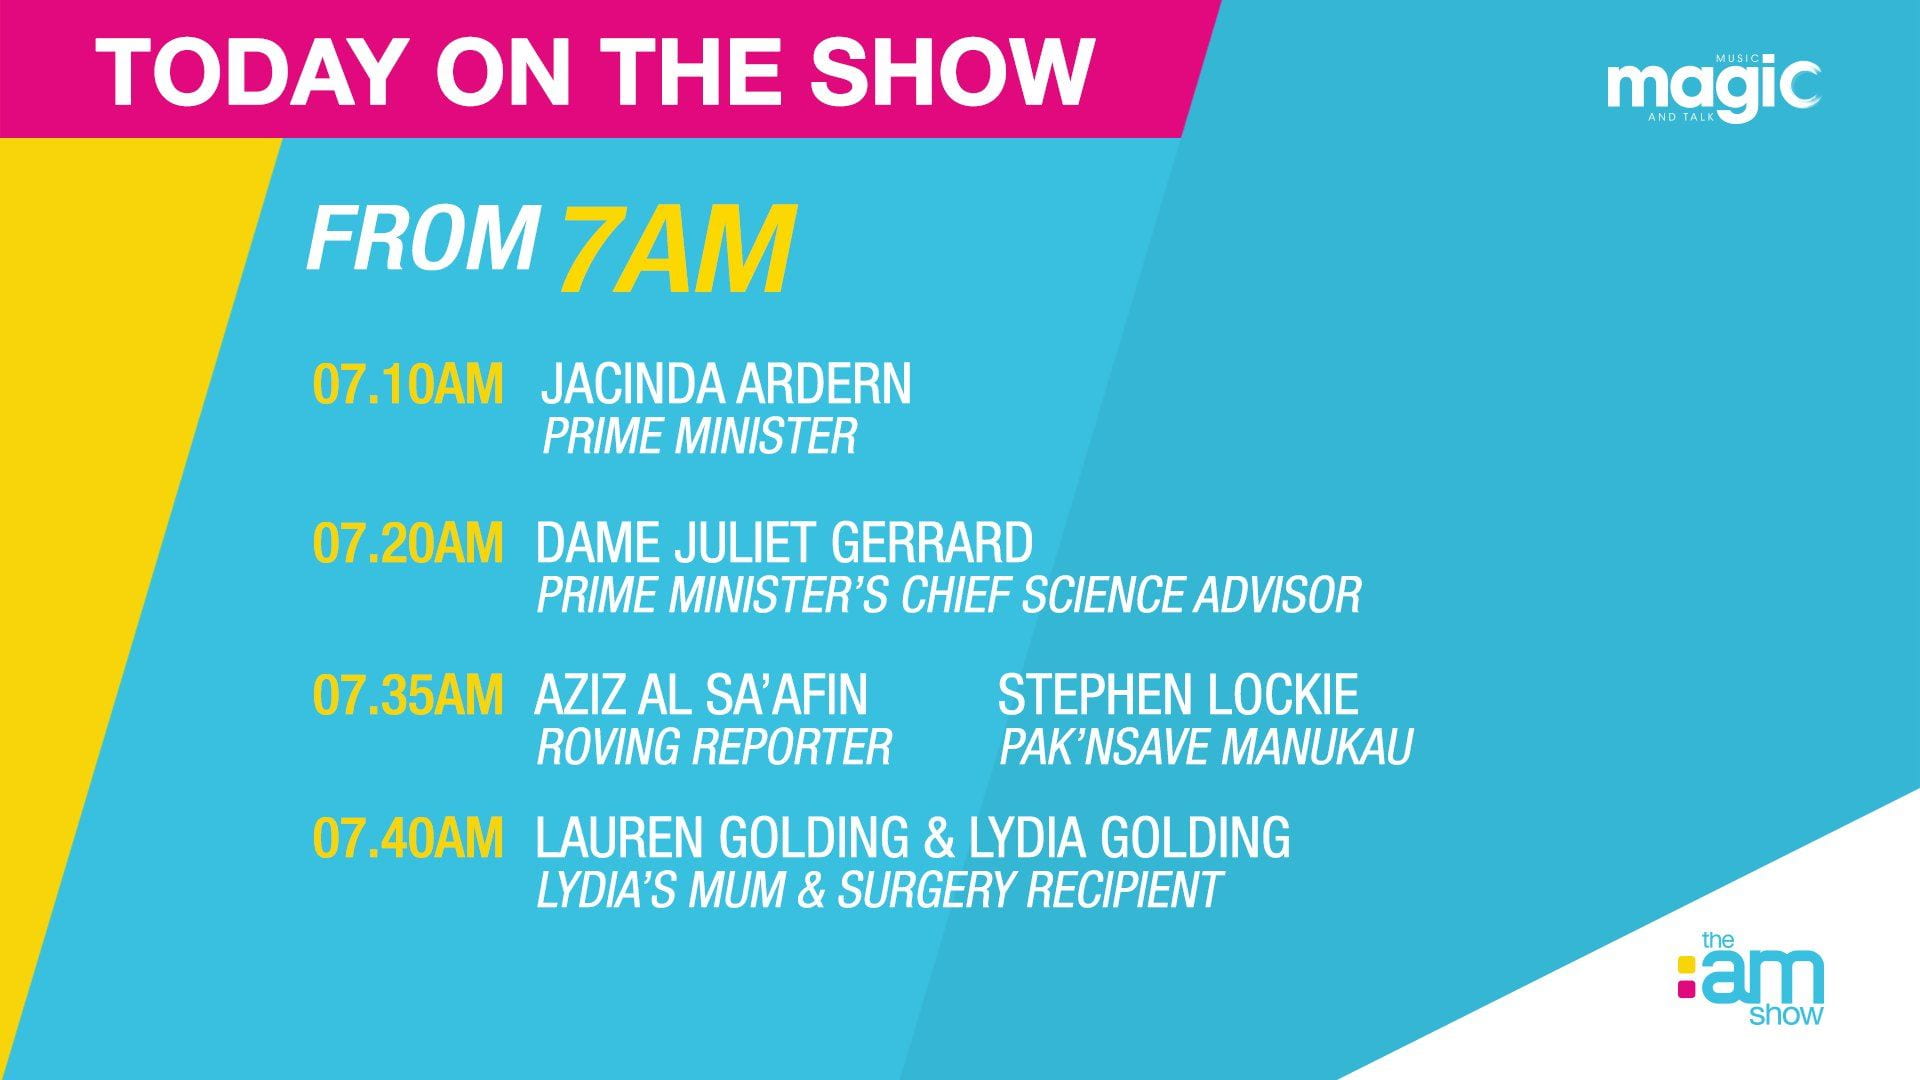 Today on the show from 7am: 7.20am Juliet GerrardToday on the show from 7am: 7.20am Juliet Gerrard